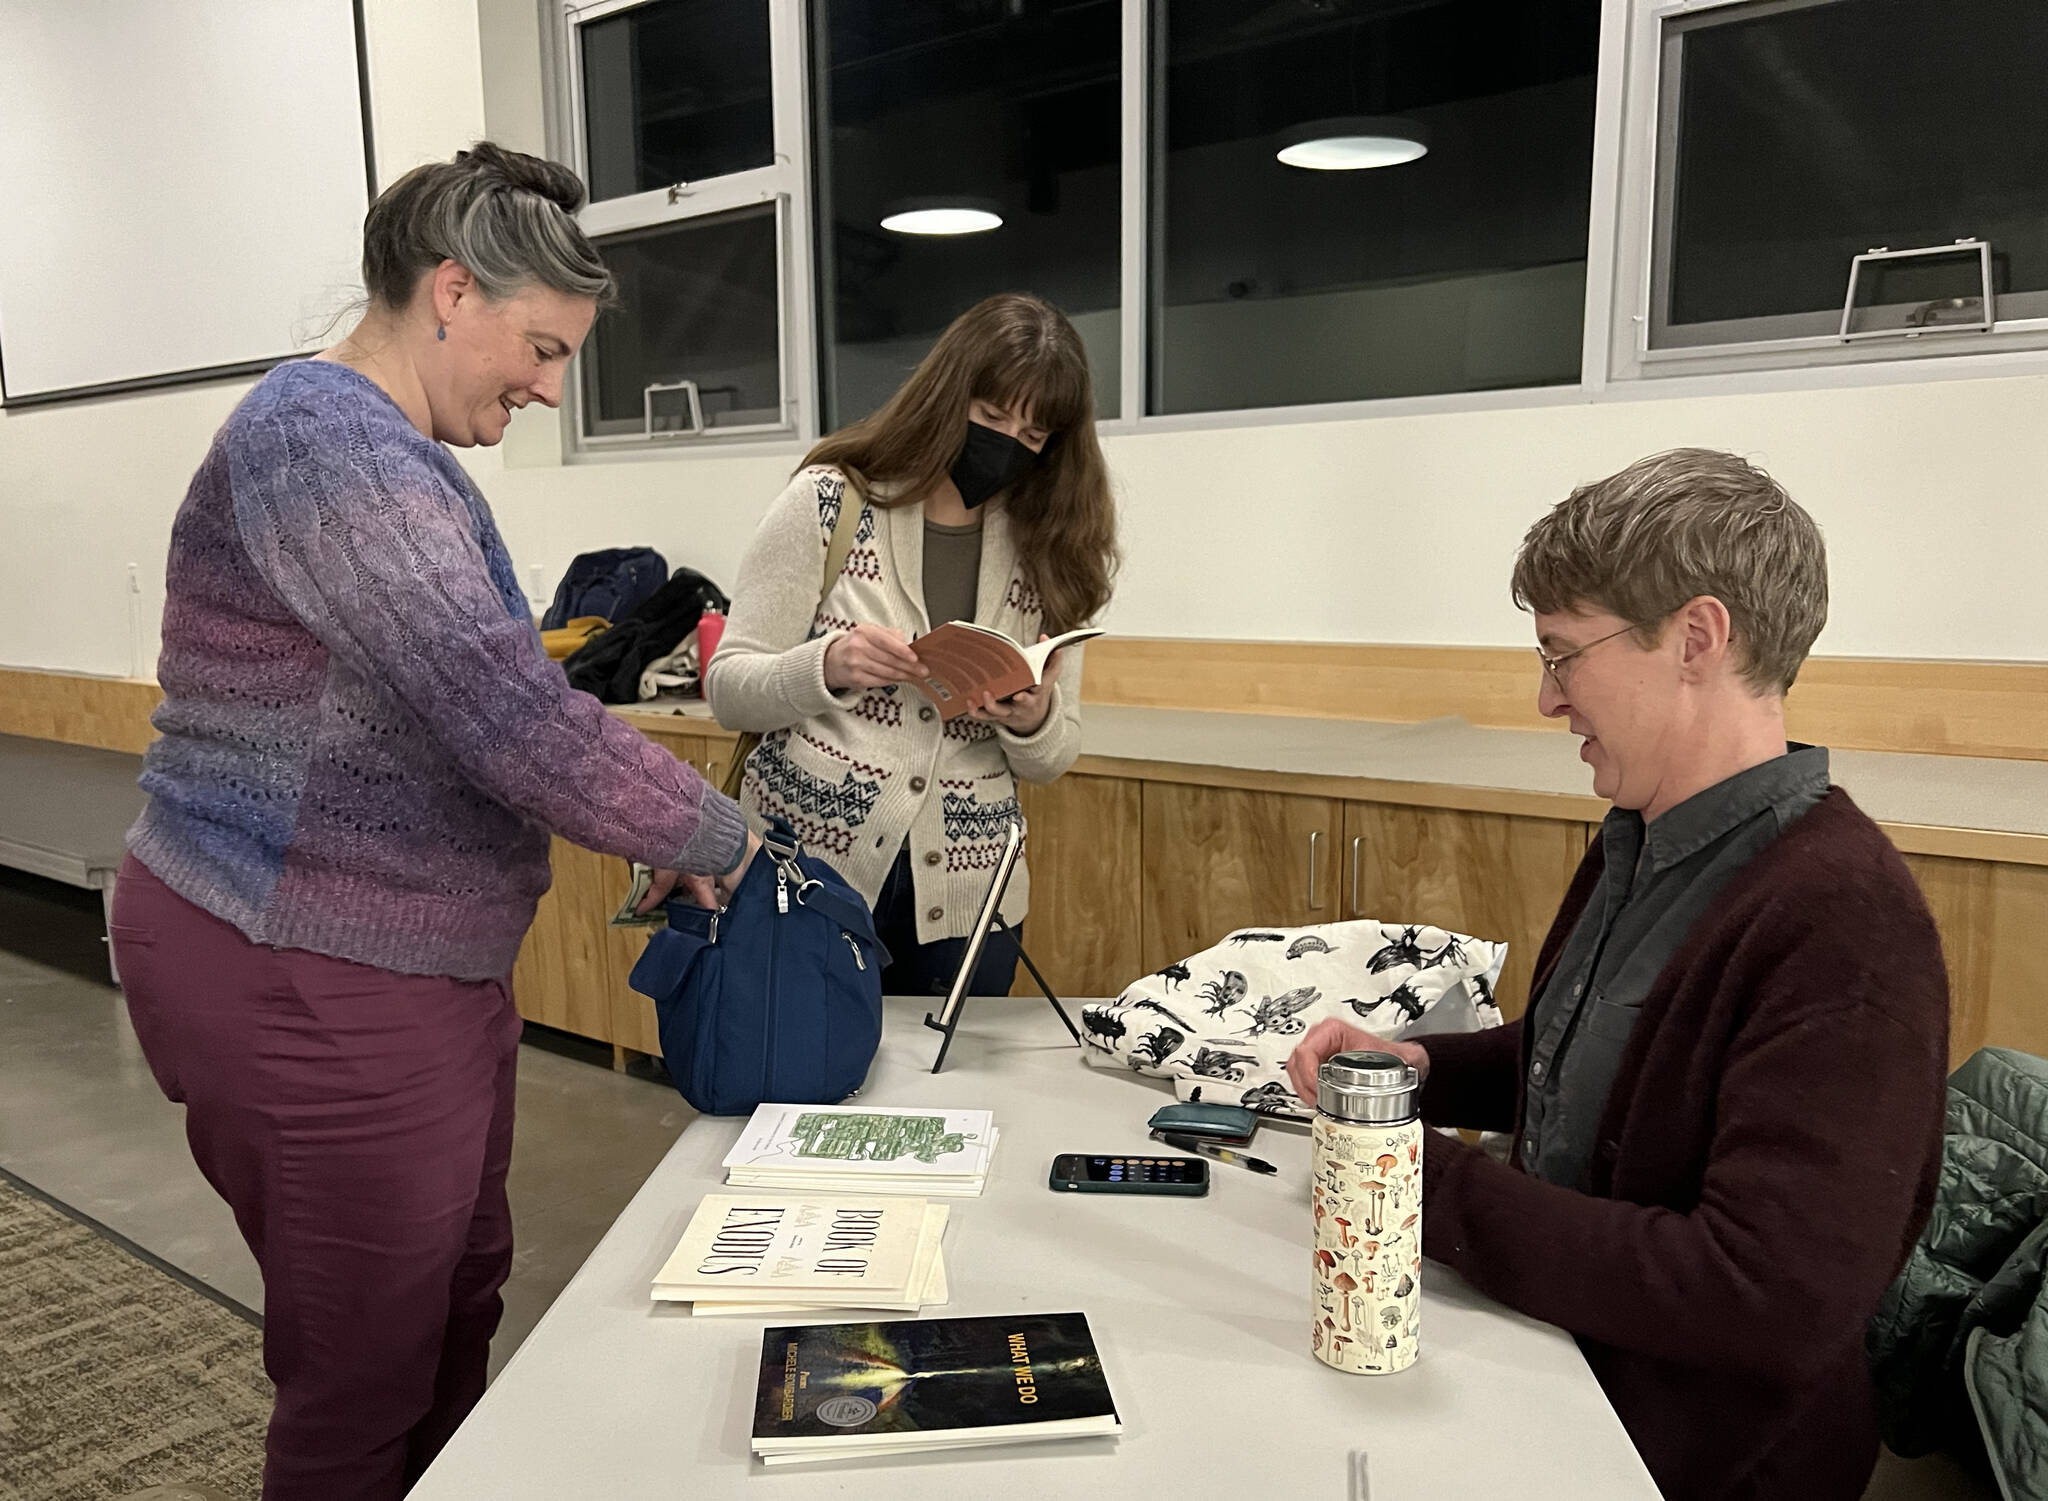 Kathryn Smith, the January 2023 Bloedel Reserve creative resident, autographs one of her poetry books for Amanda Williamsen, who read a poem about cats at the BARN Open Mic night Jan. 19.